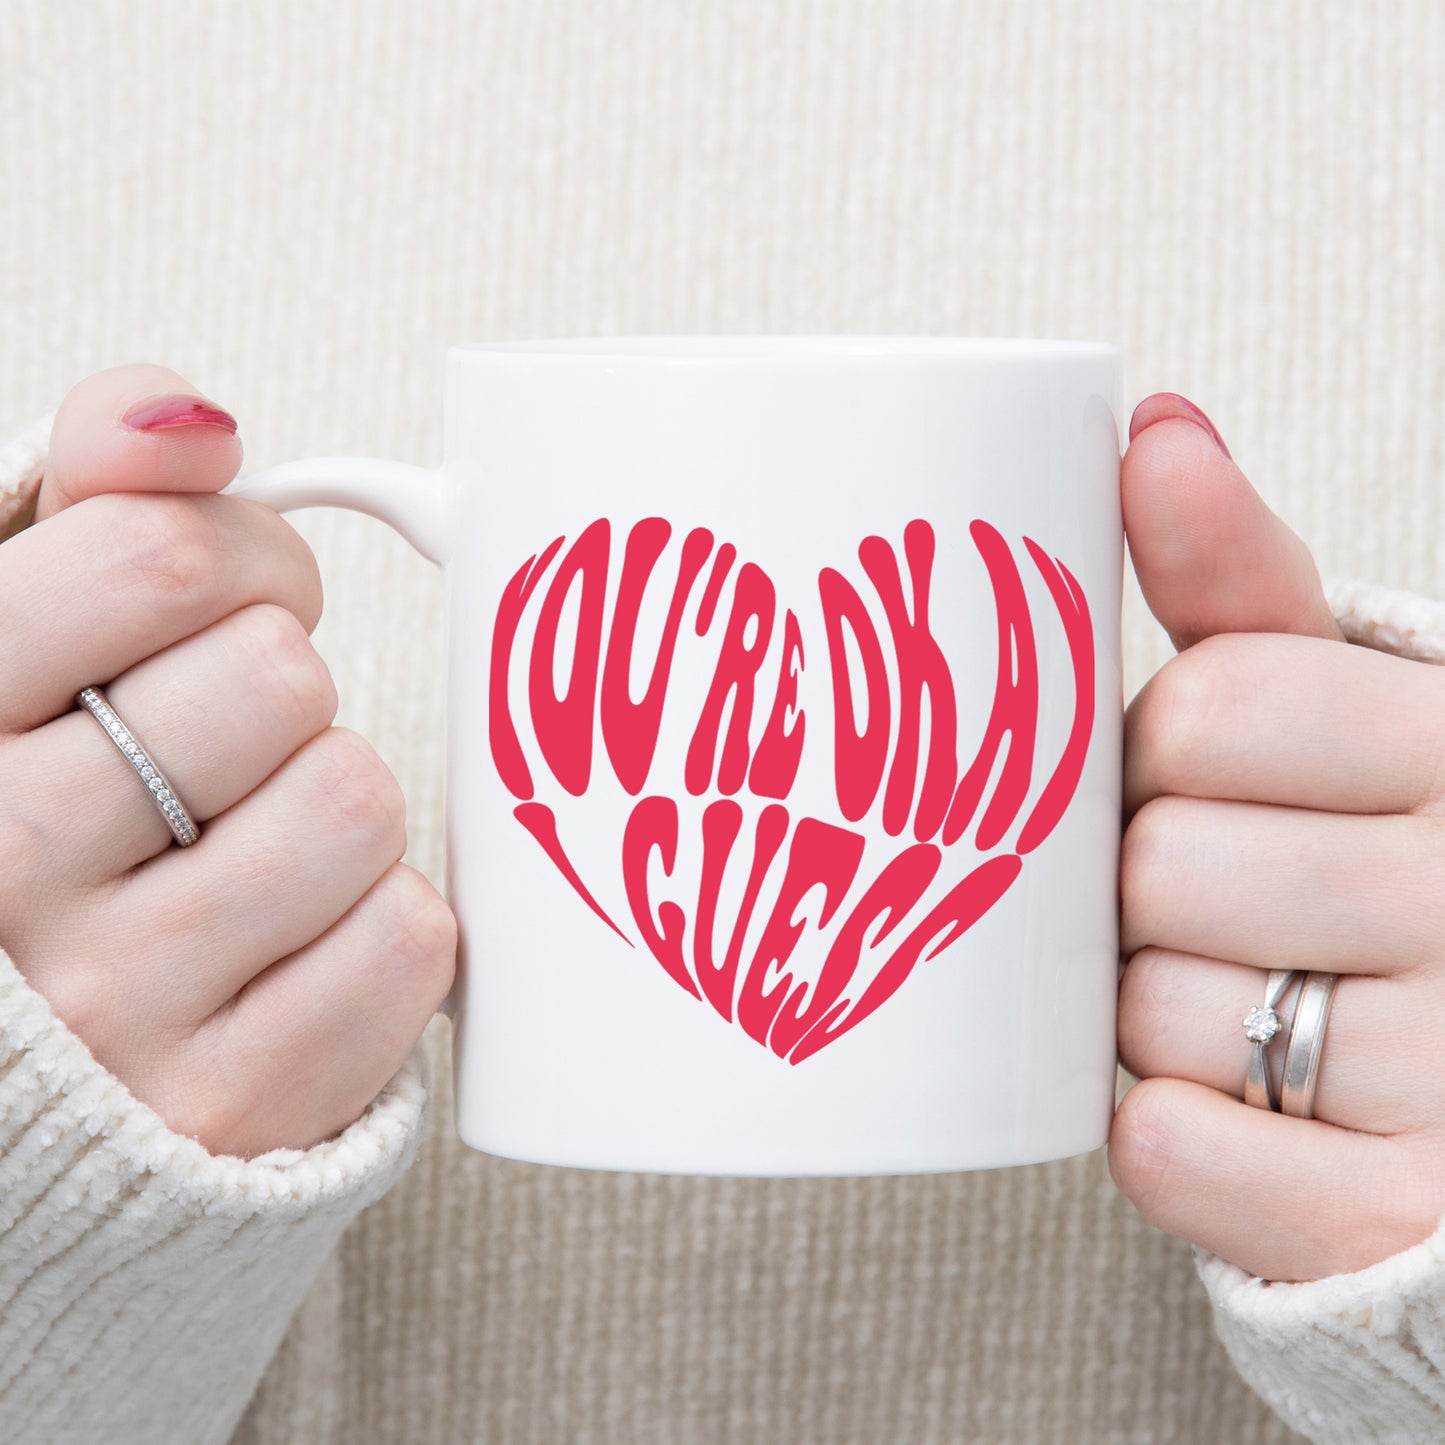 You're Okay I Guess Mug and/or Coaster Gift  - Always Looking Good -   